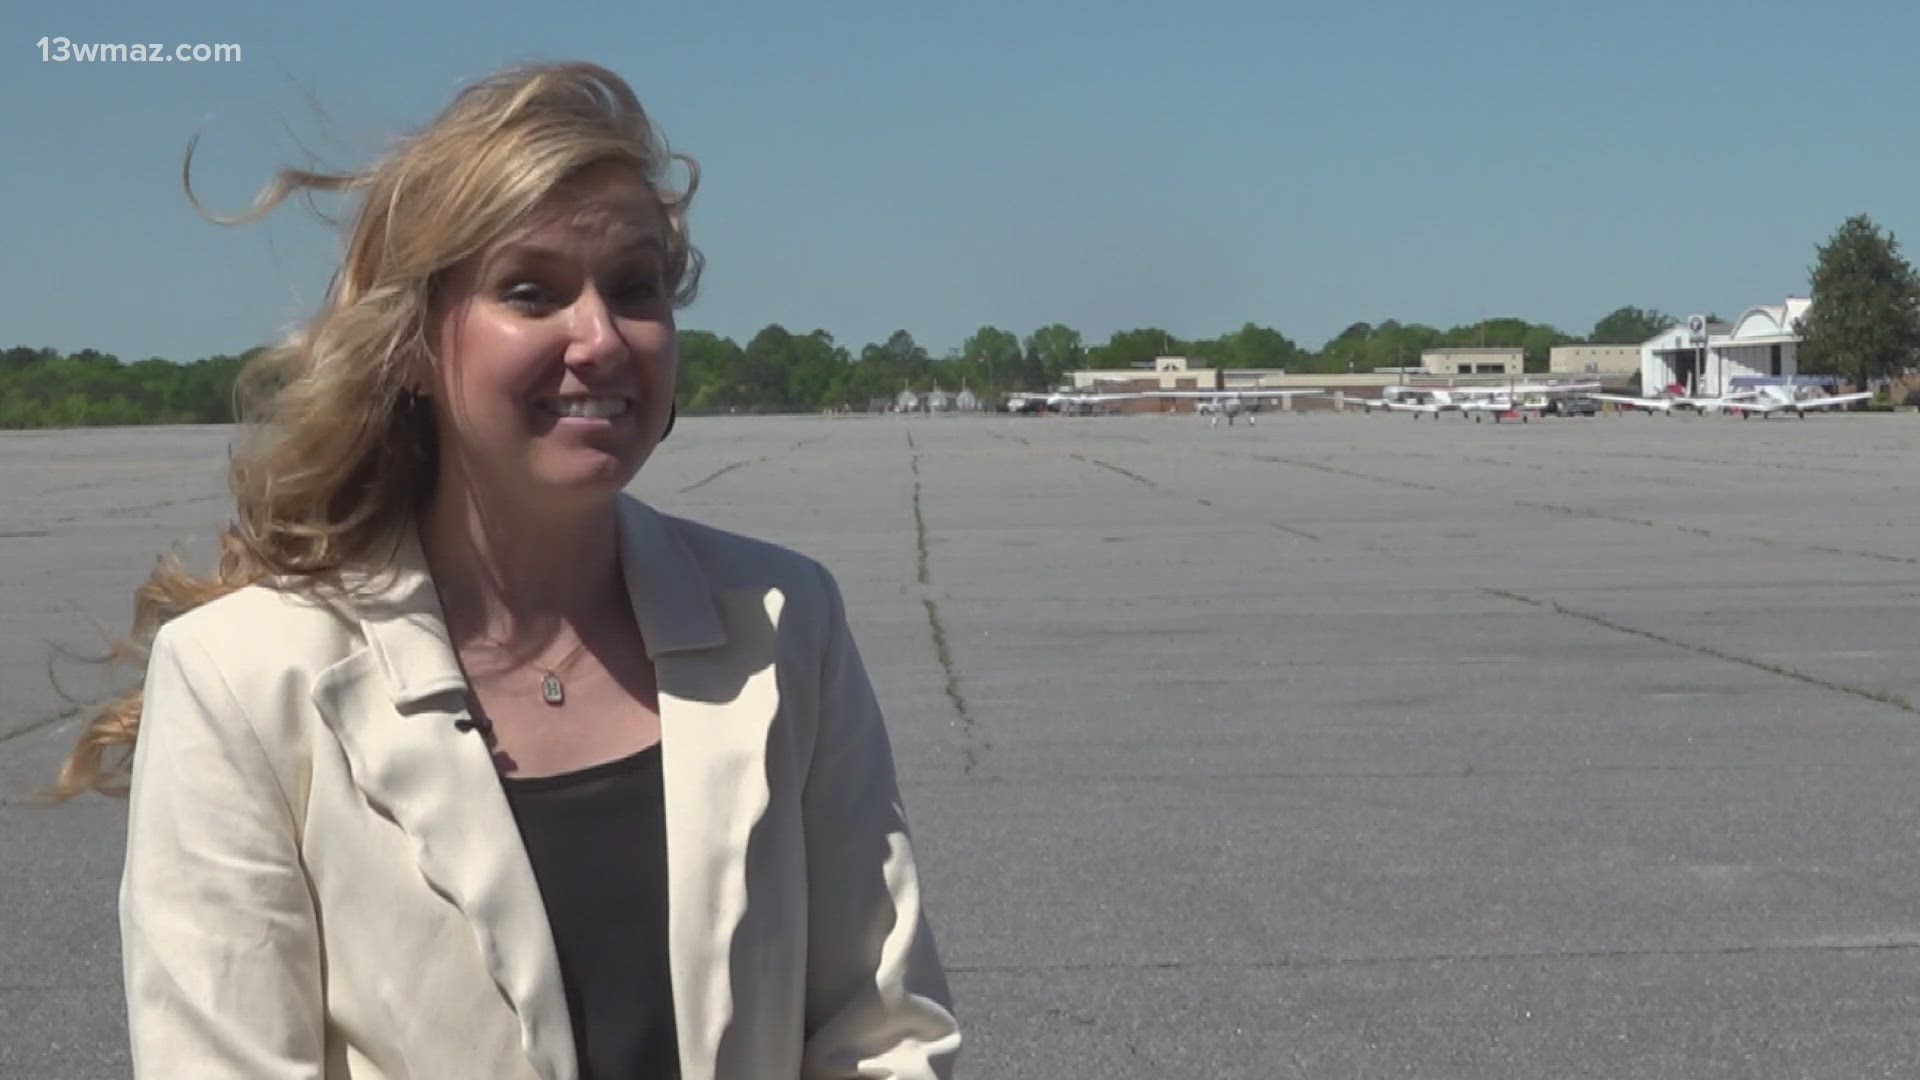 Heather Lowe is the first female manager at the Airport, carrying on her family legacy of flyers.